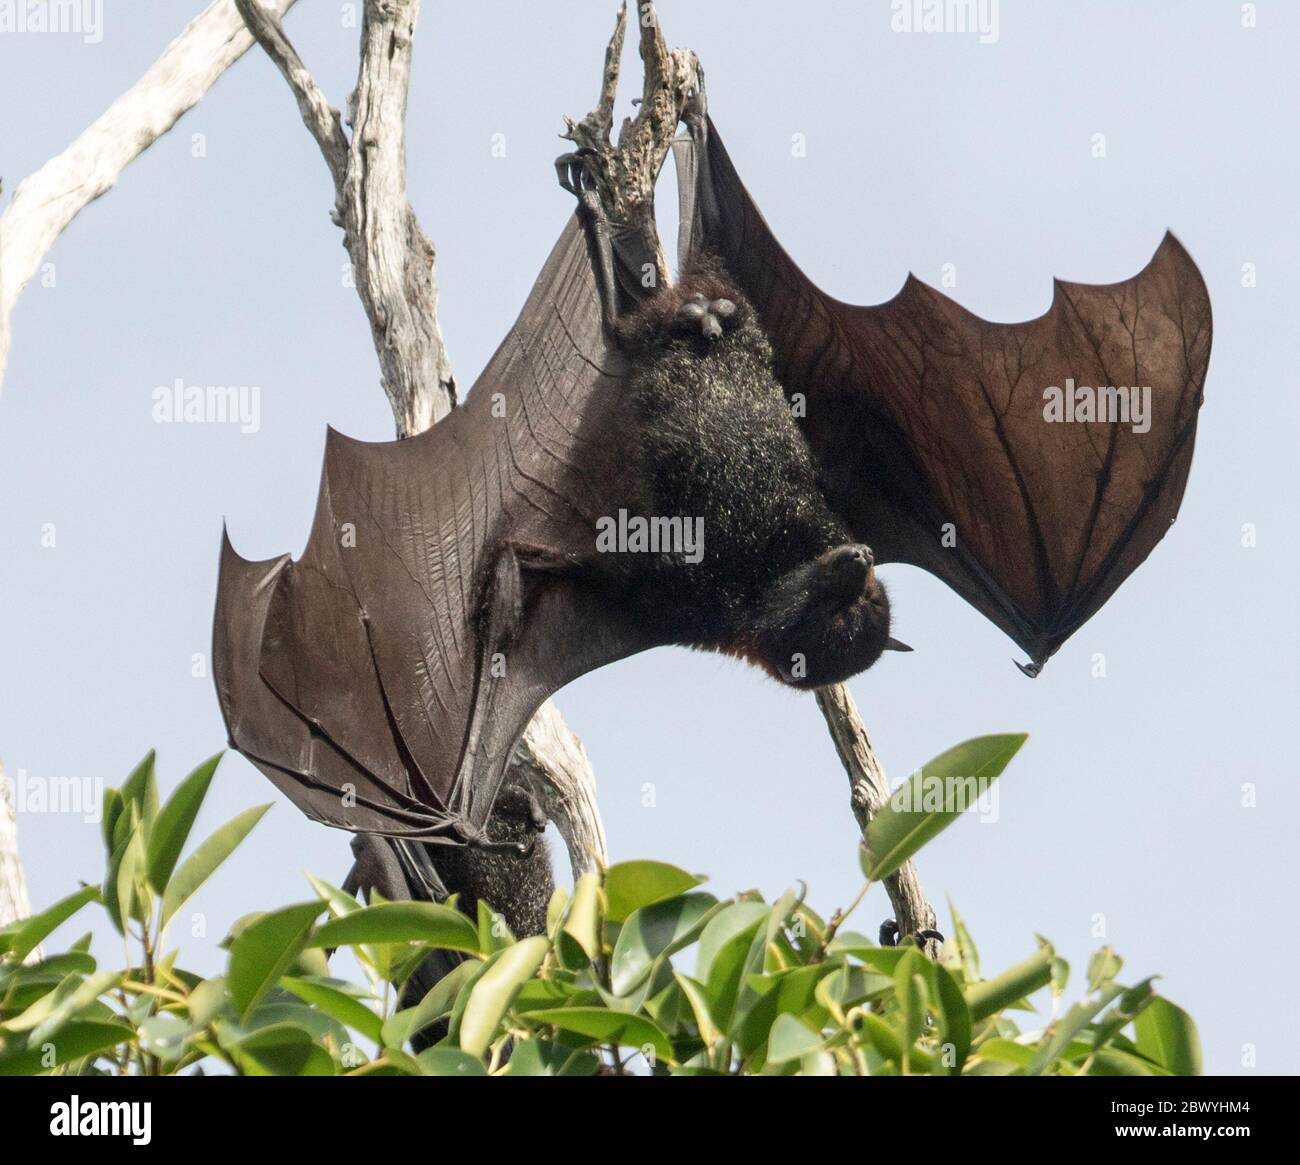 Australian grey-headed flying fox / fruit bat, Pteropus poliocephalus, hanging from branch of tree with wings extended and ready for flight Stock Photo